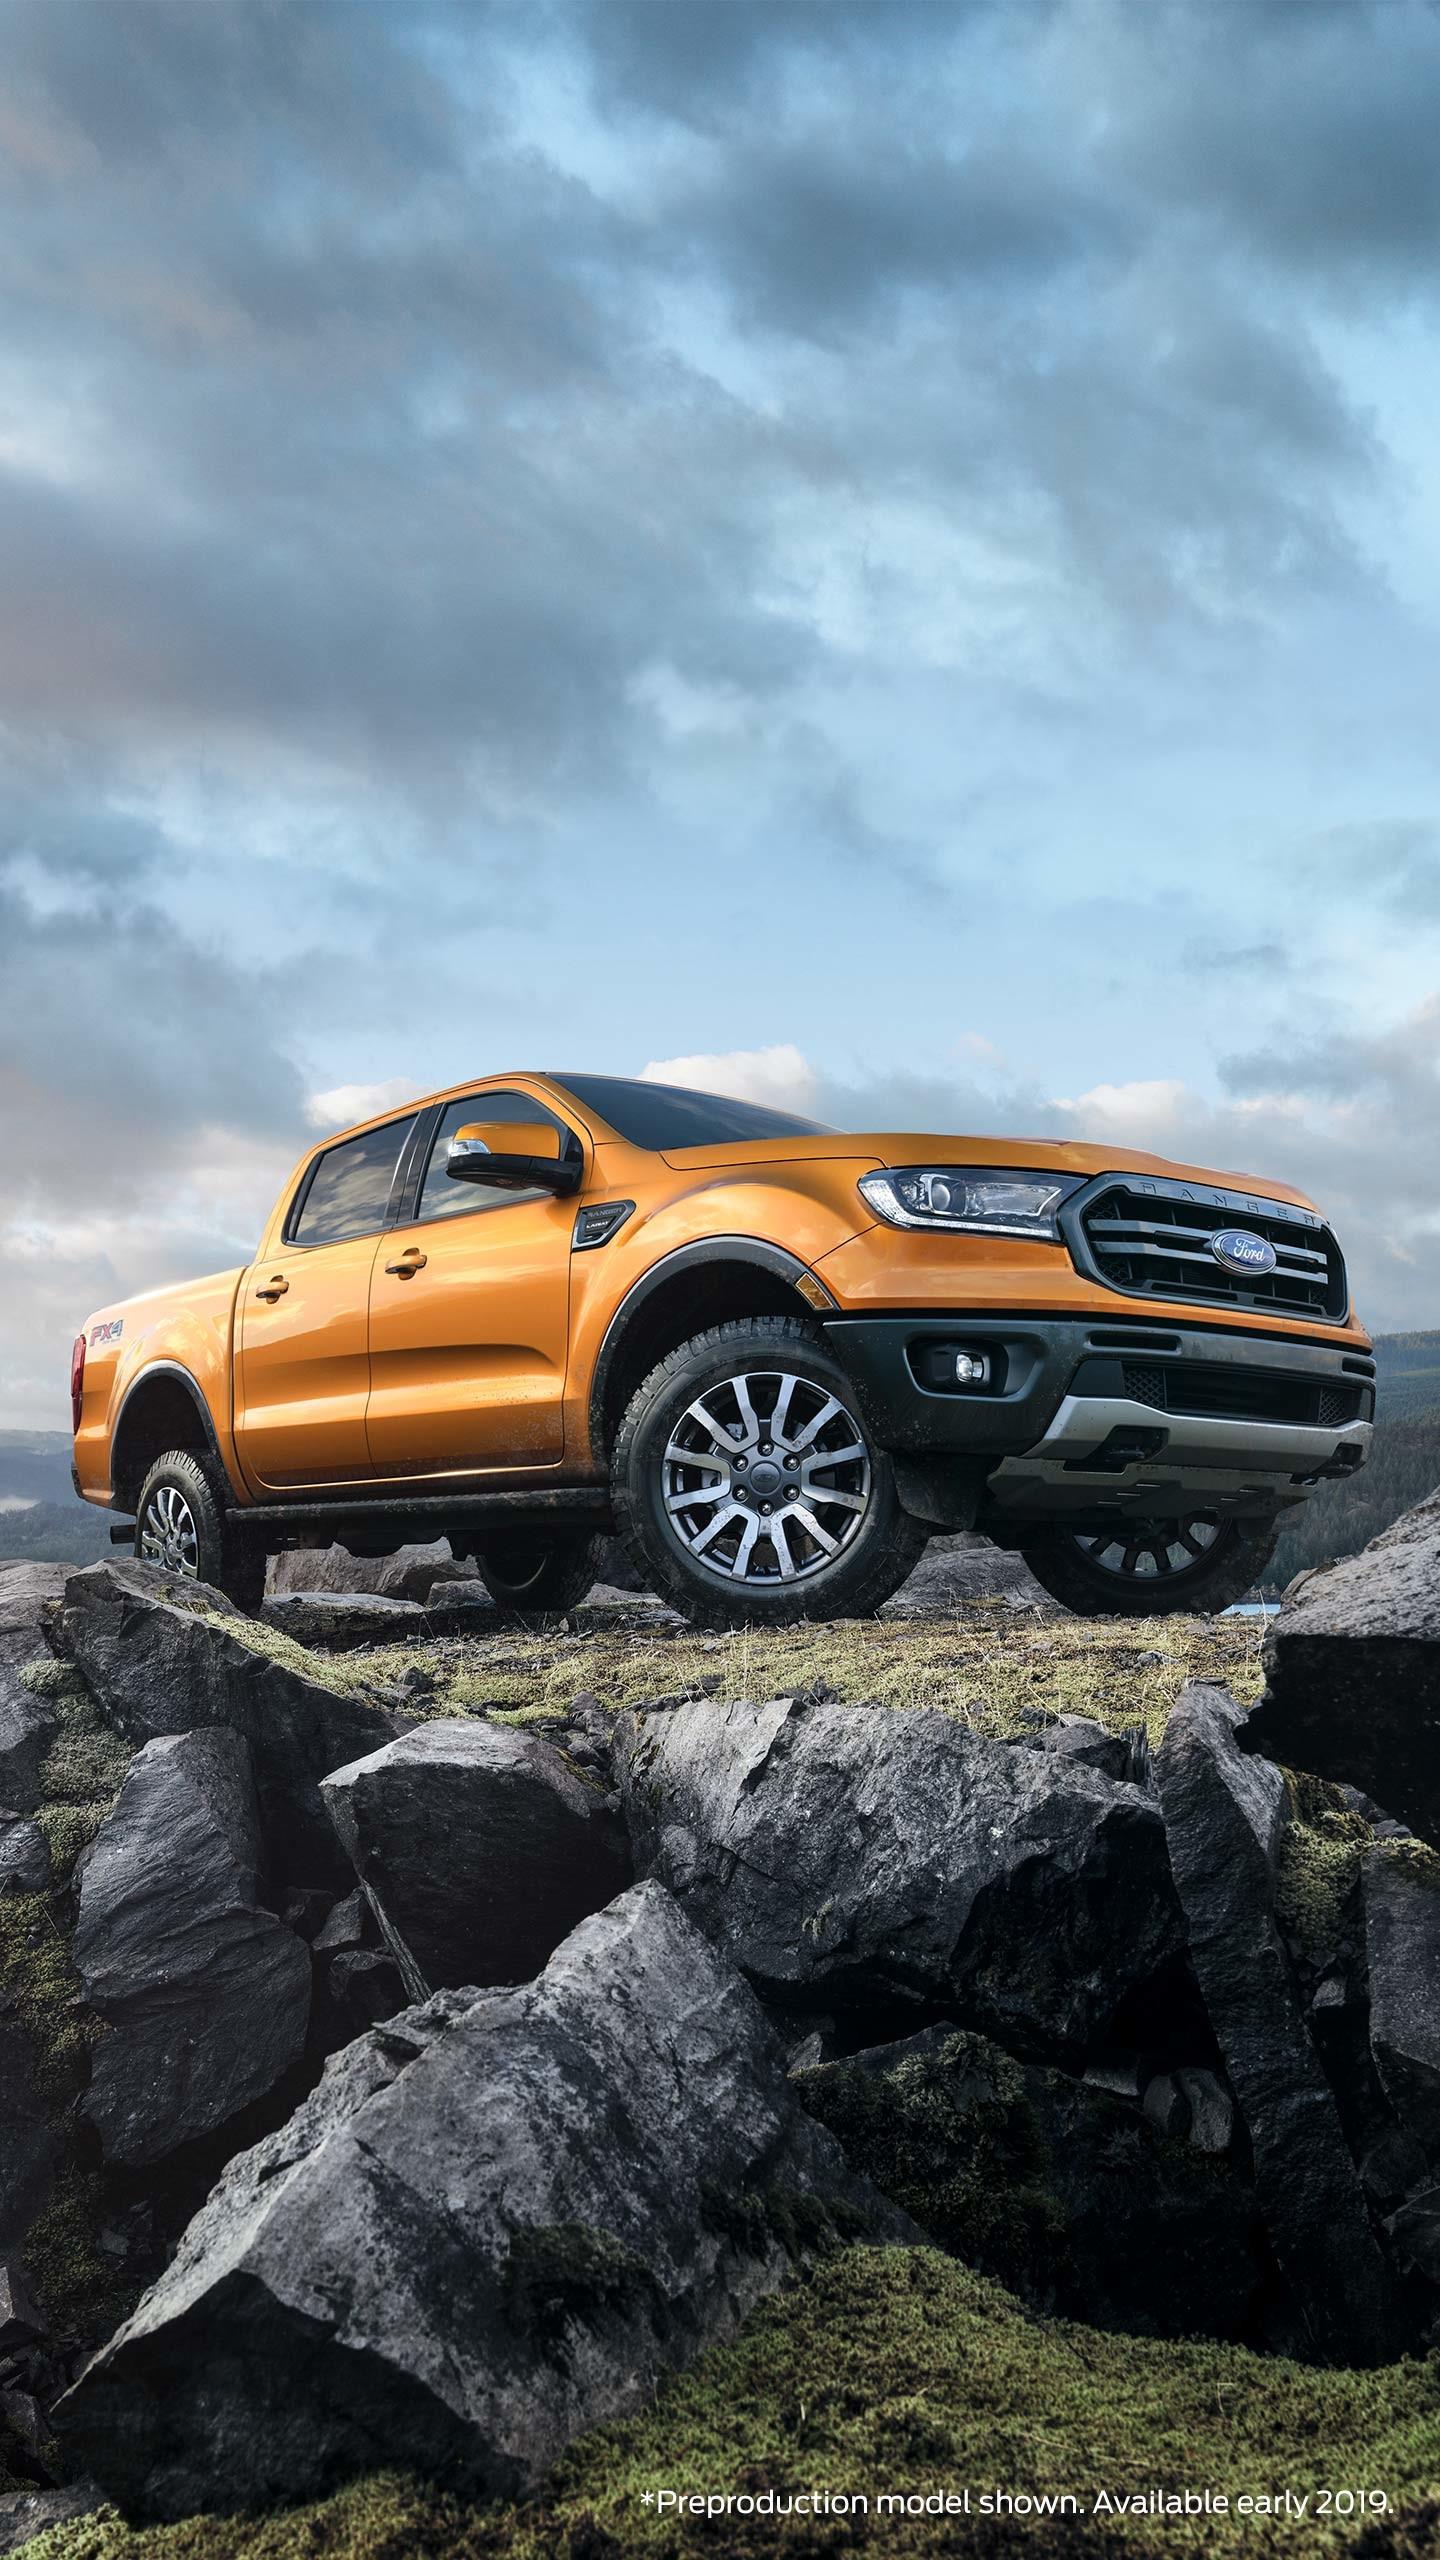 Ford Ranger Raptor iPhone Wallpapers - Wallpaper Cave